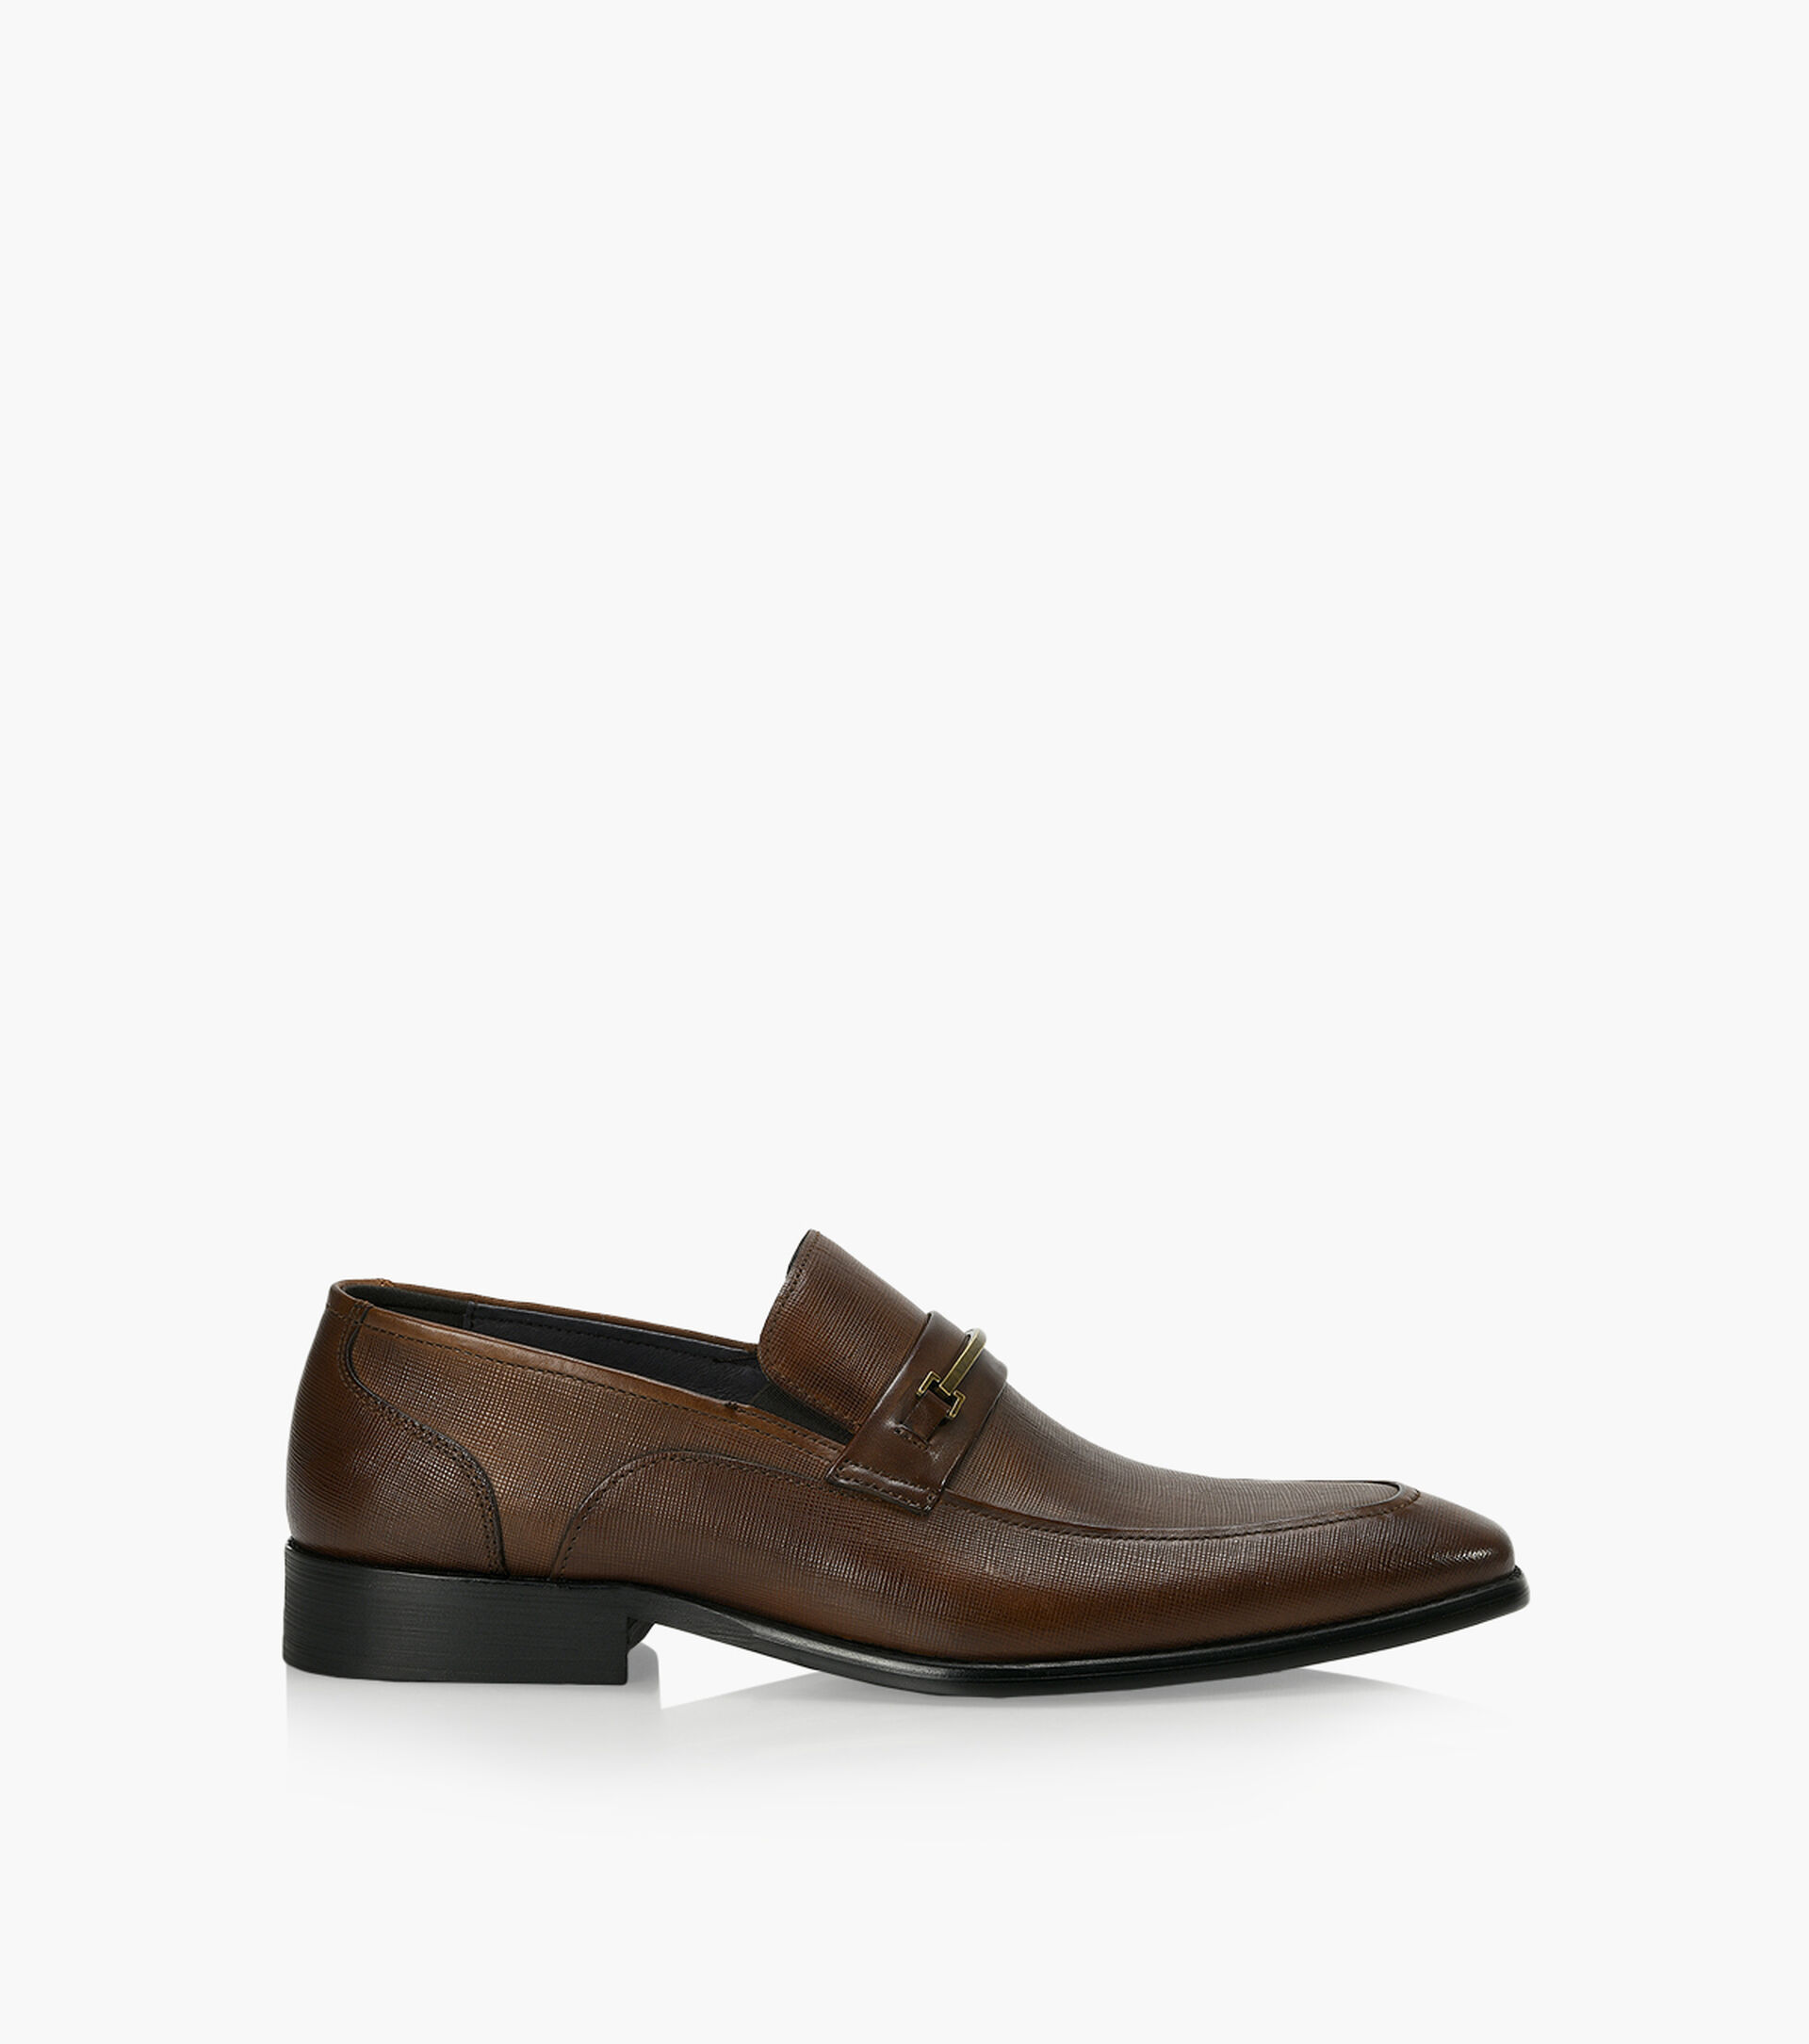 BROWNS ARTHUR - Patent Leather | Browns Shoes